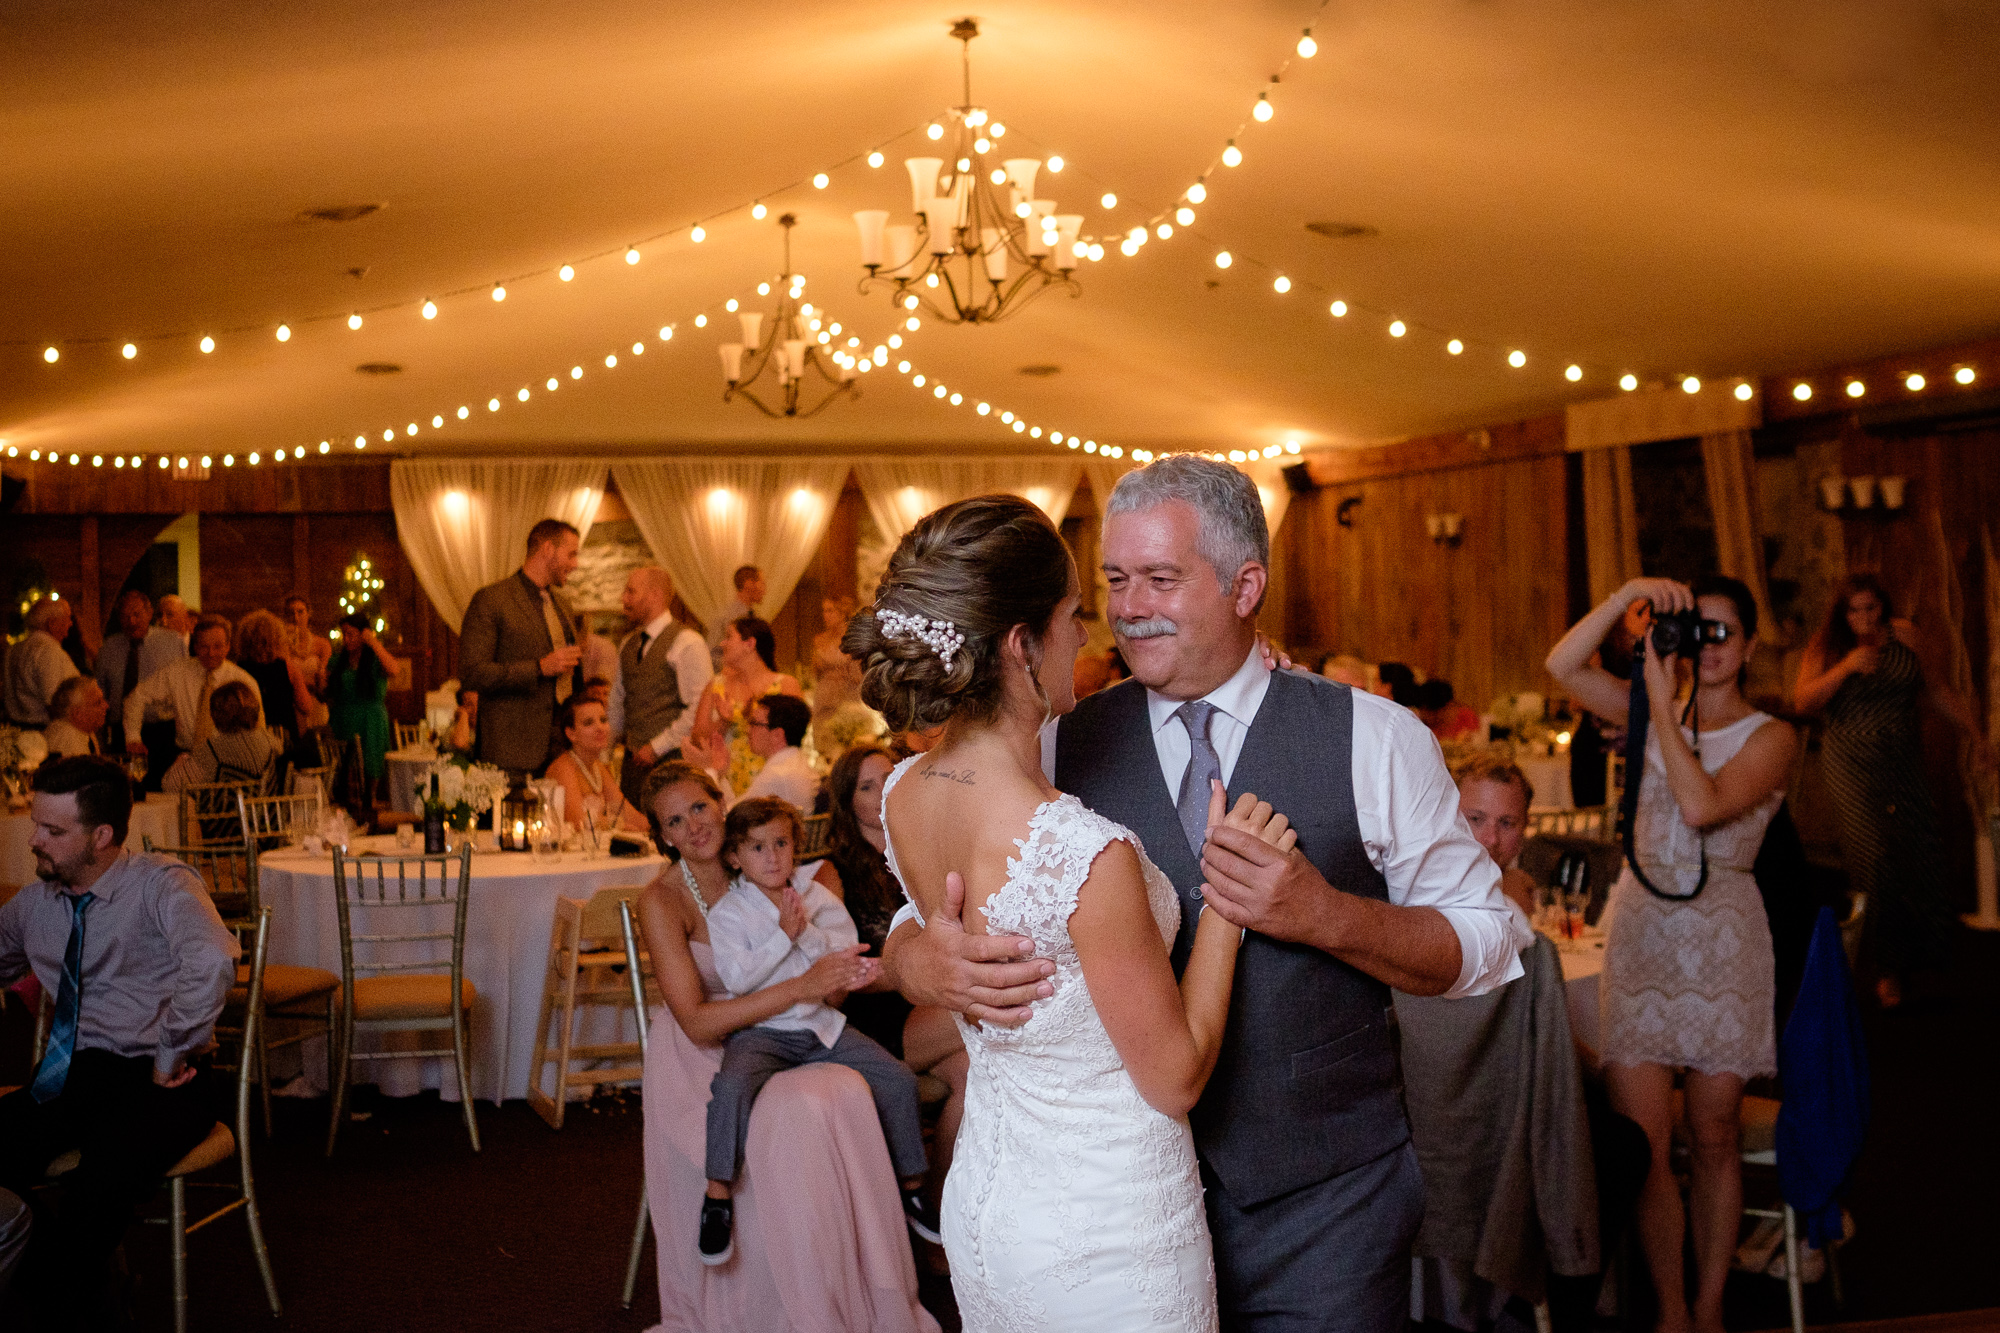  The bride dances with her father during the wedding reception at the Hessenland Inn 